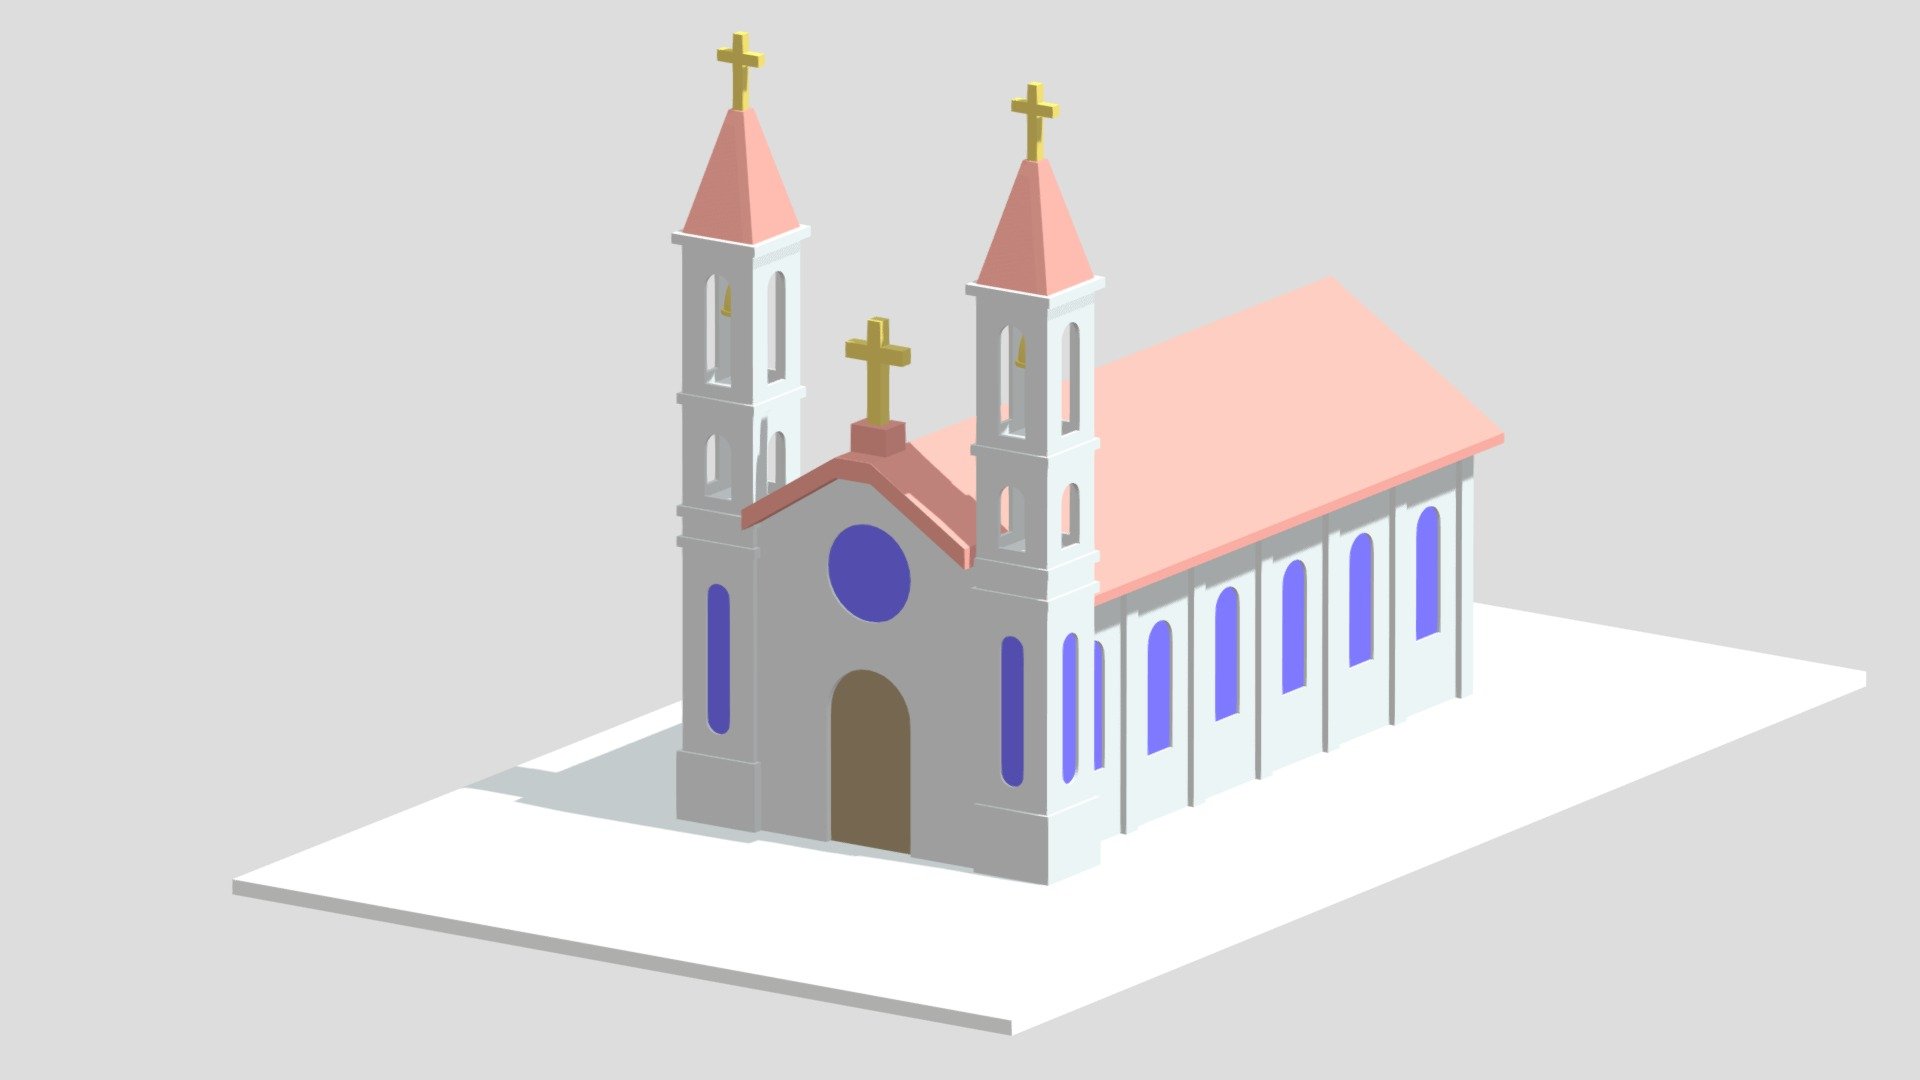 -Lowpoly Cartoon Church

-Made with Blender 2.8.

-Rendered with Cycles.

-system units -: m.

-Polygons: 2,483.

-Vertices: 3,274.

-This model included 6 objects.

-Formats: . blend . fbx . obj, c4d,dae,fbx,unity.

-Thank you 3d model